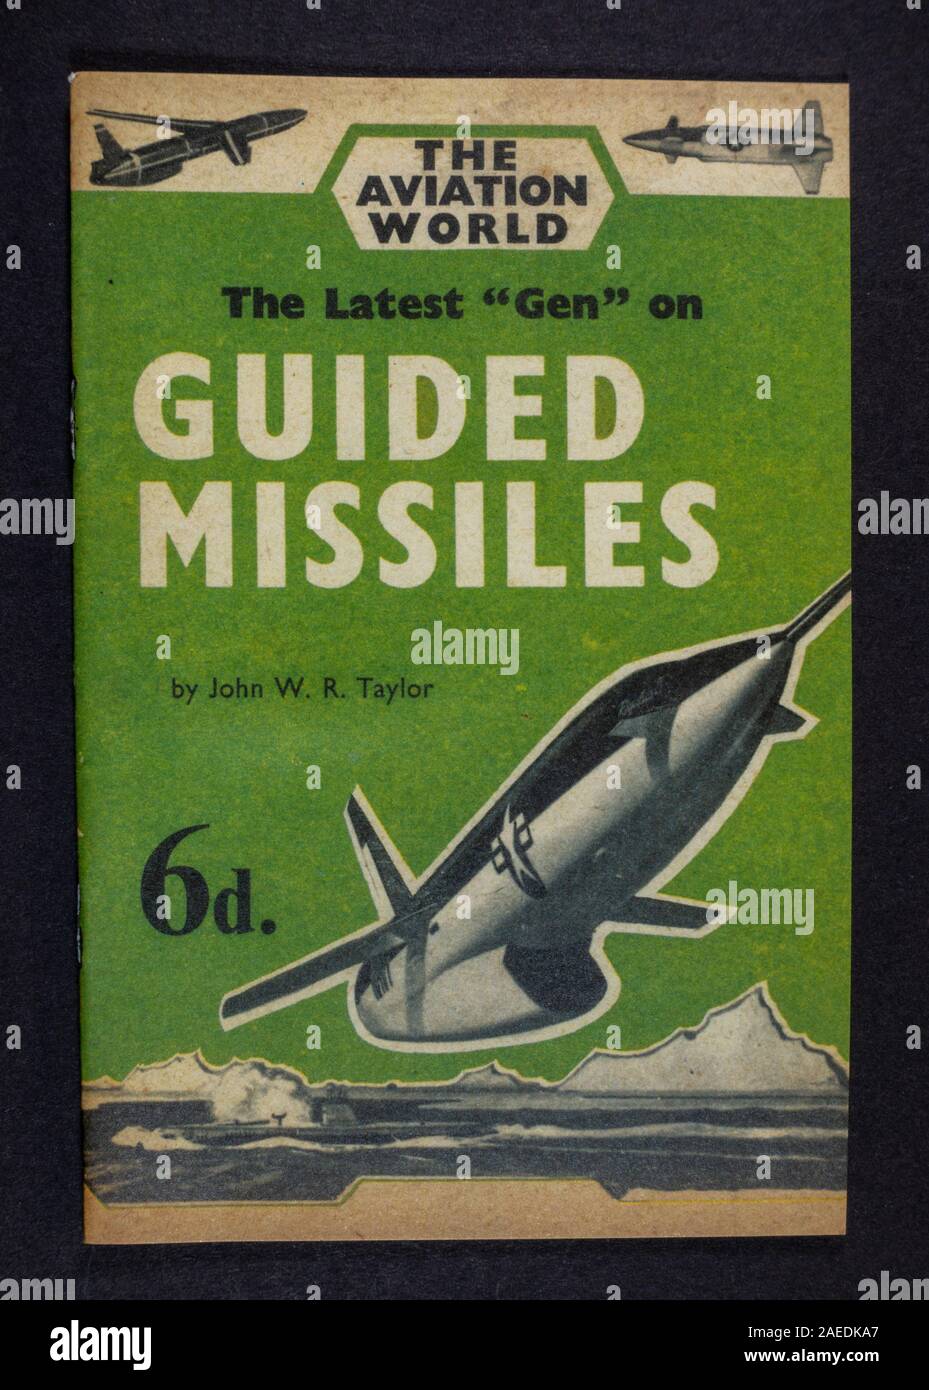 'The Latest 'Gen' on Guided Missiles' booklet by The Aviation World, a piece of replica memorabilia from the Cold War era. Stock Photo